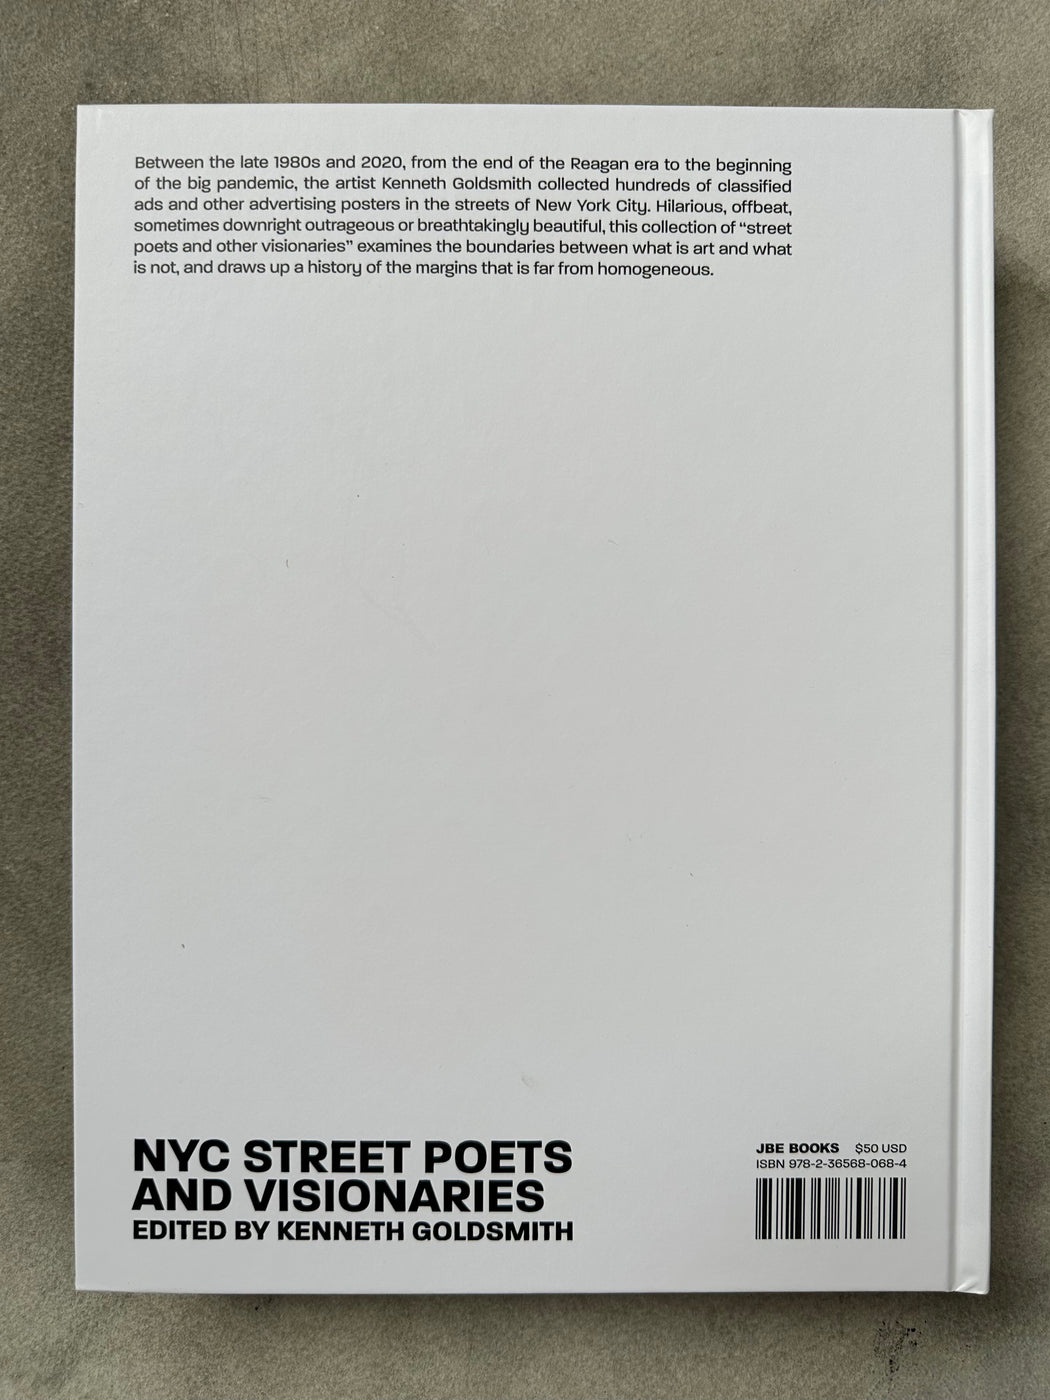 "NYC Street Poets and Visionaries" by Kenneth Goldsmith